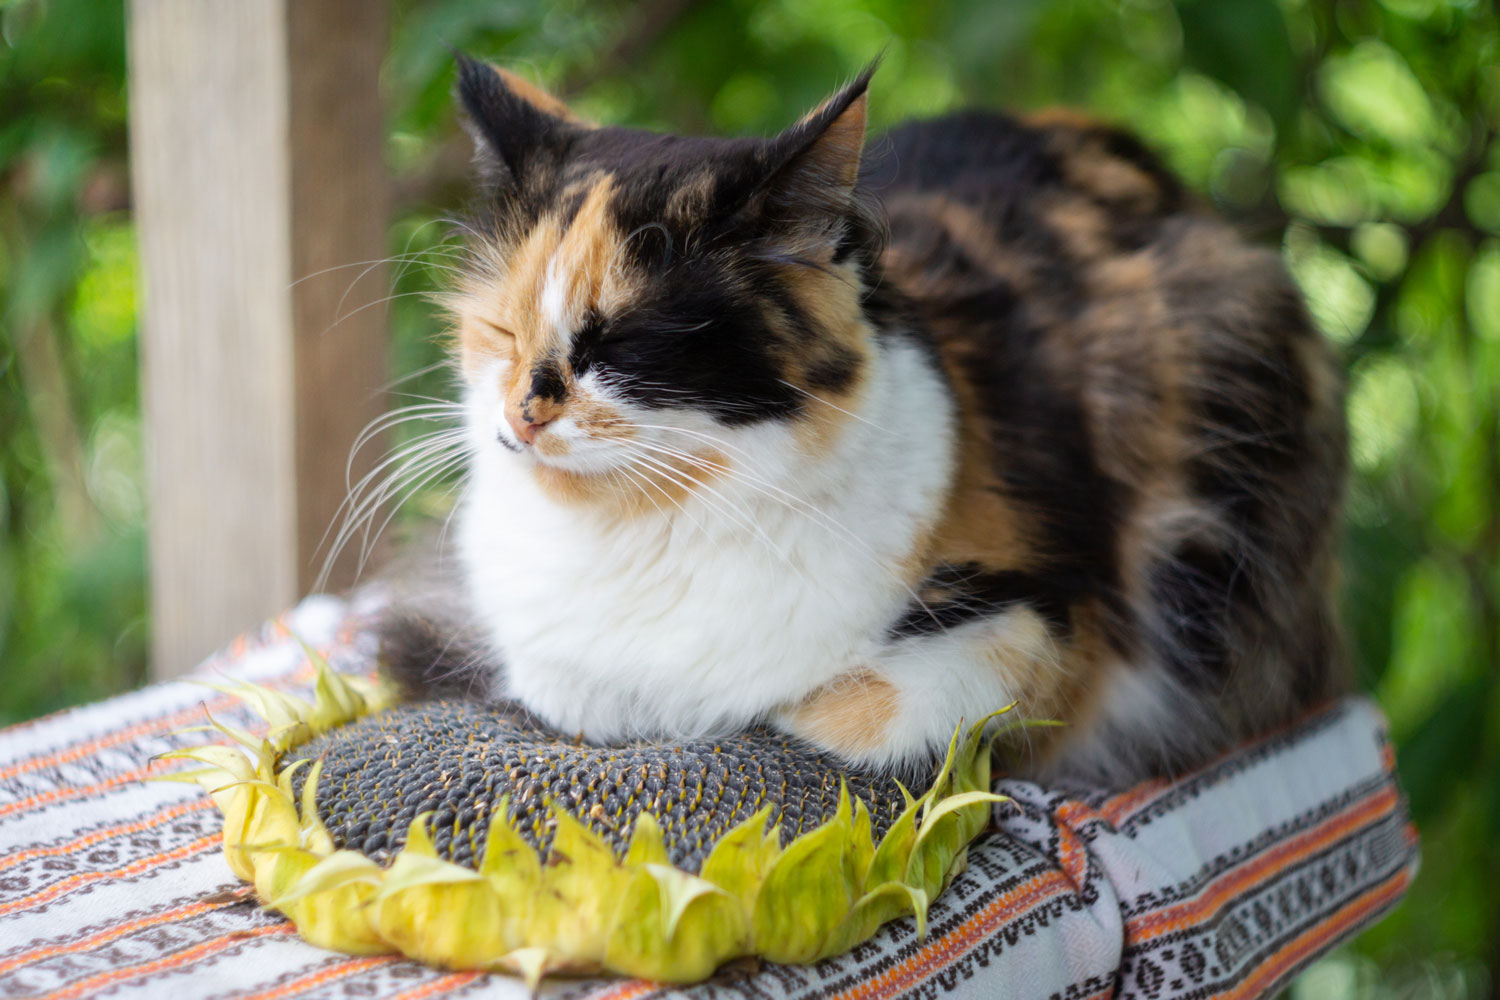 Are Sunflowers Toxic To Cats? TheCatSite Articles